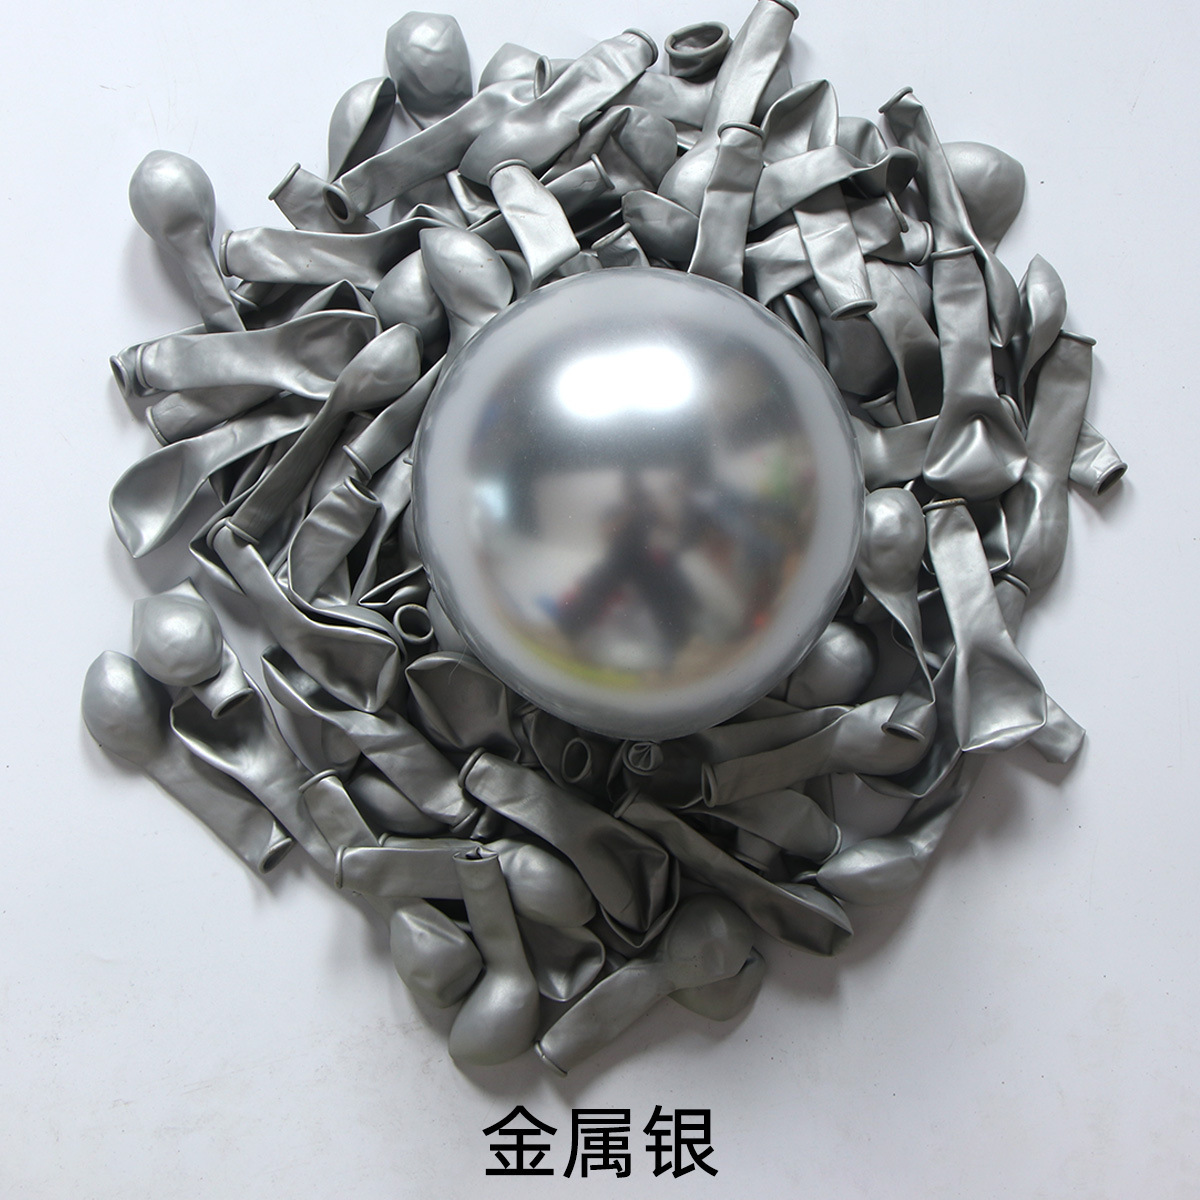 5-Inch Metal Balloon Wedding Birthday Party Decoration Chrome Rubber Balloons Wholesale